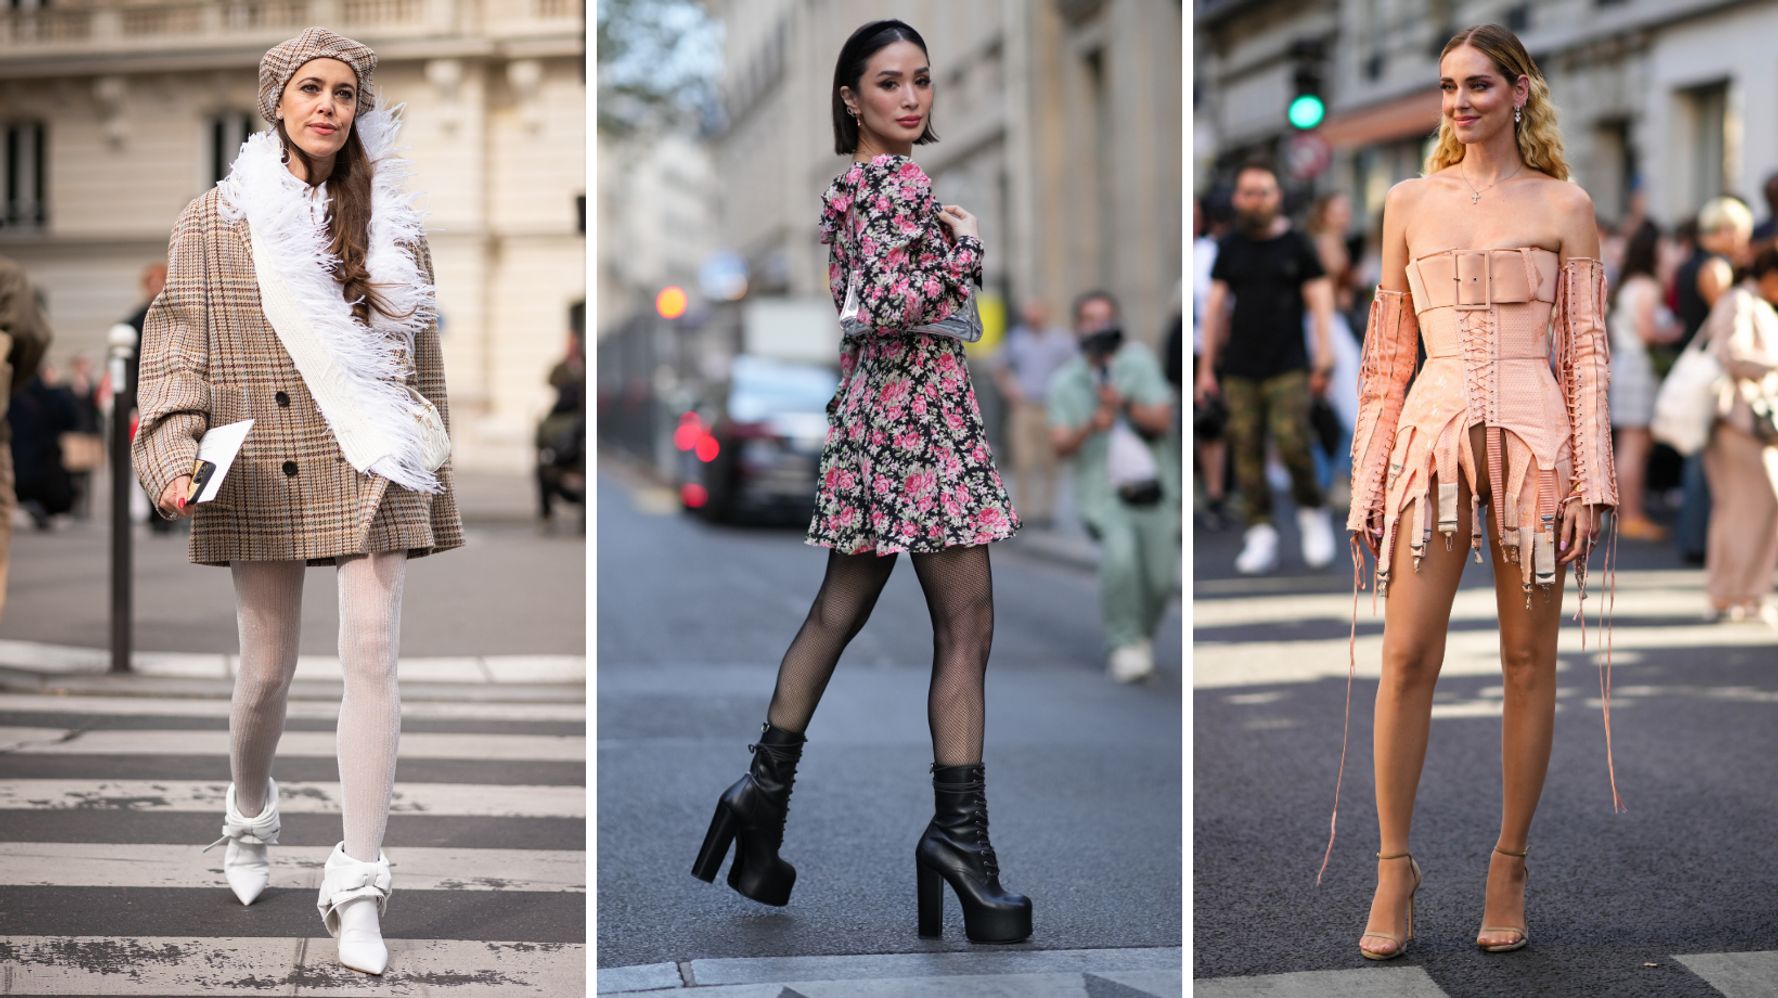 How To Transform Your Winter Outfits With The Best Patterned Tights